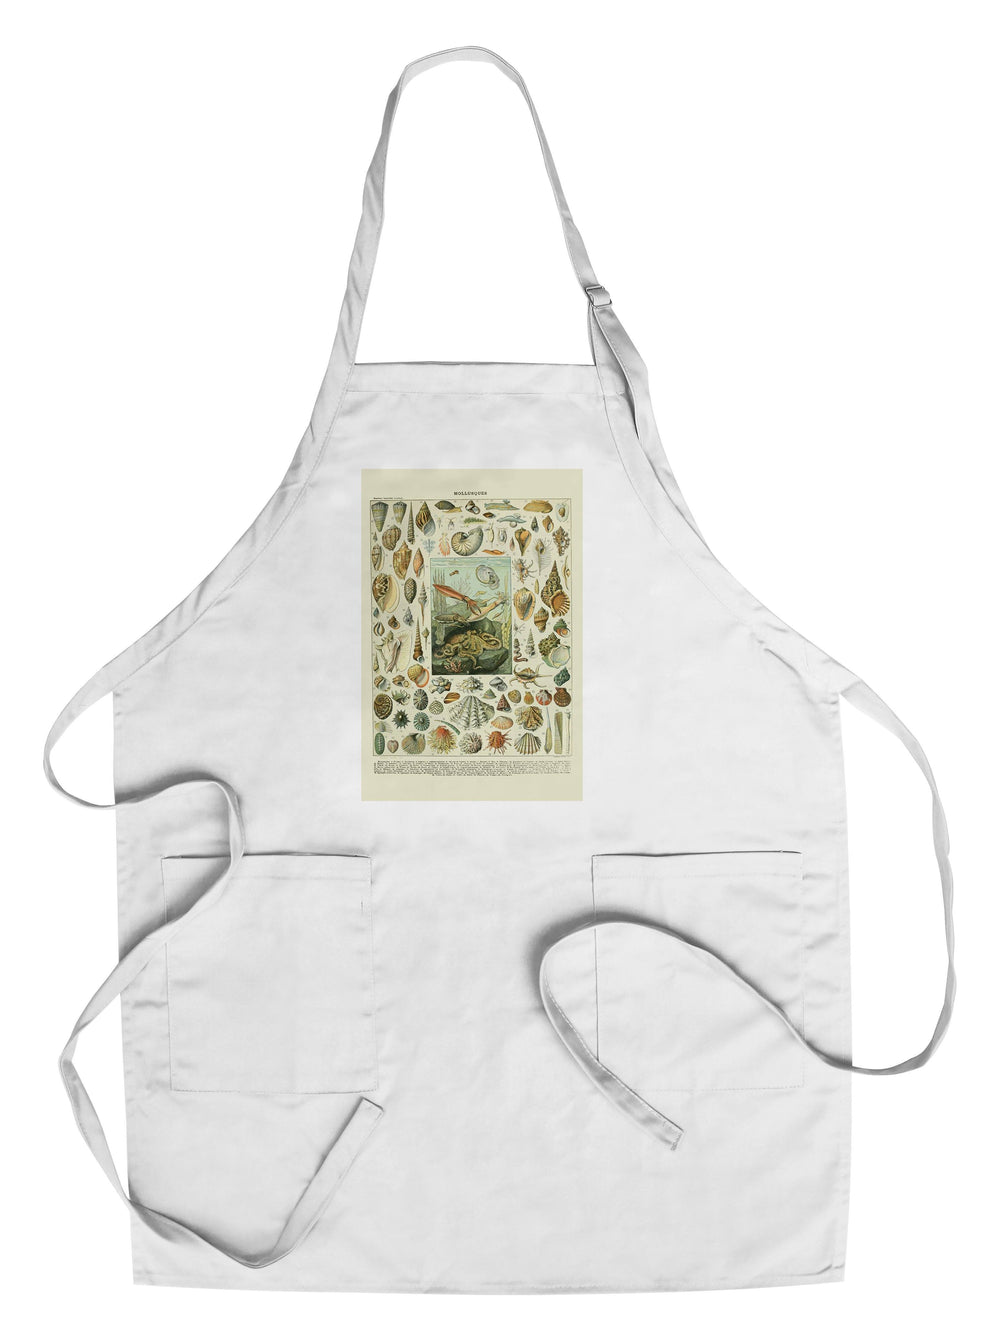 Assorted Shells, A, Vintage Bookplate, Adolphe Millot Artwork, Towels and Aprons Kitchen Lantern Press 